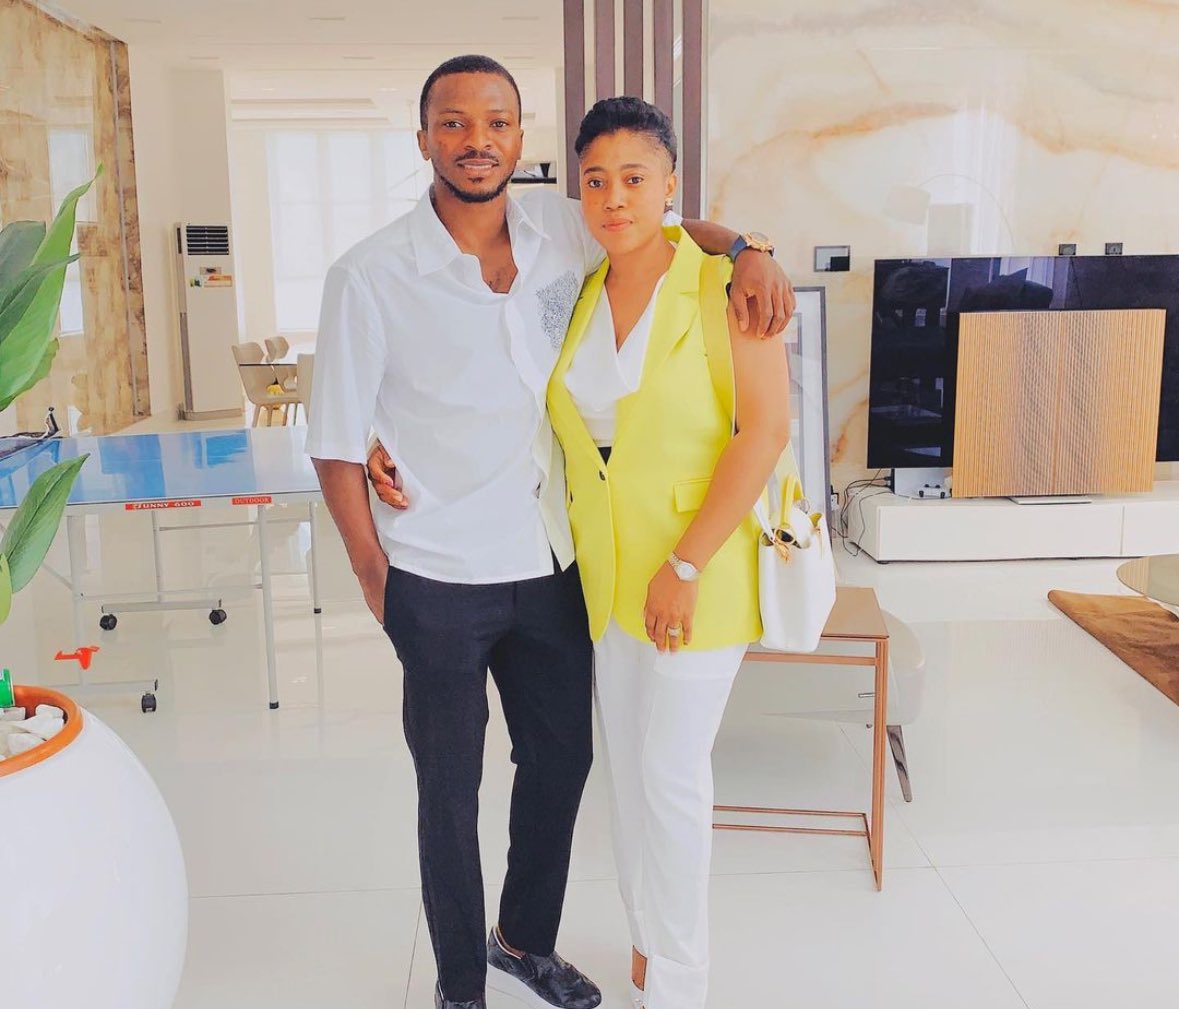 Ezinne Dora Kayode, wife of Super Eagles forward - Olanrewaju Kayode respond to allegations of her cheating with Pastor Tobi and embezzling Larry’s funds on Instagram. “The day the blind man sees. The first thing he throws away is the stick that has helped him all his life.”